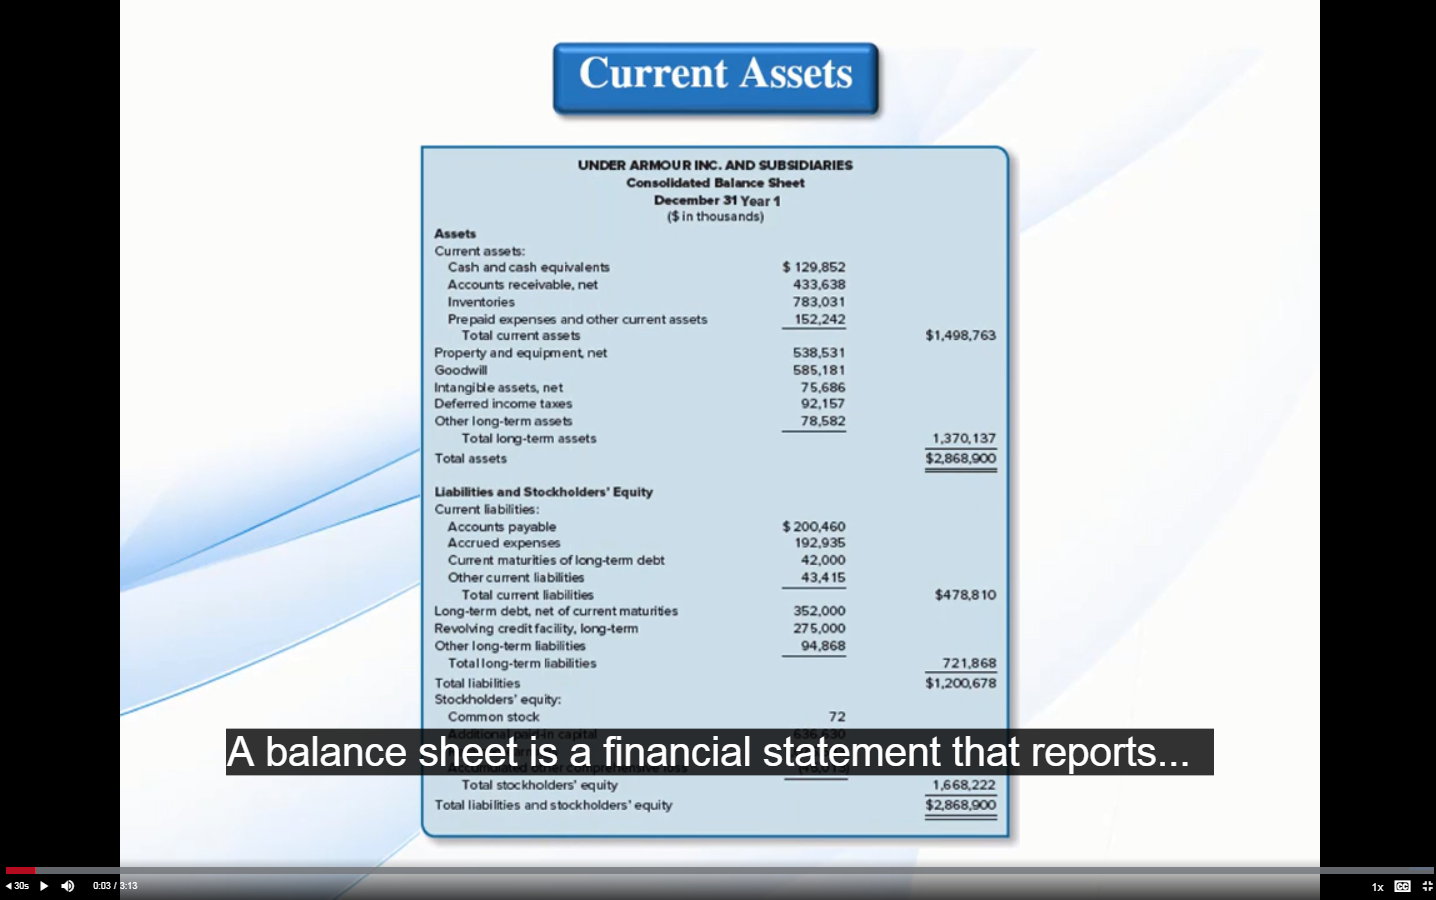 assignment for financial accounting